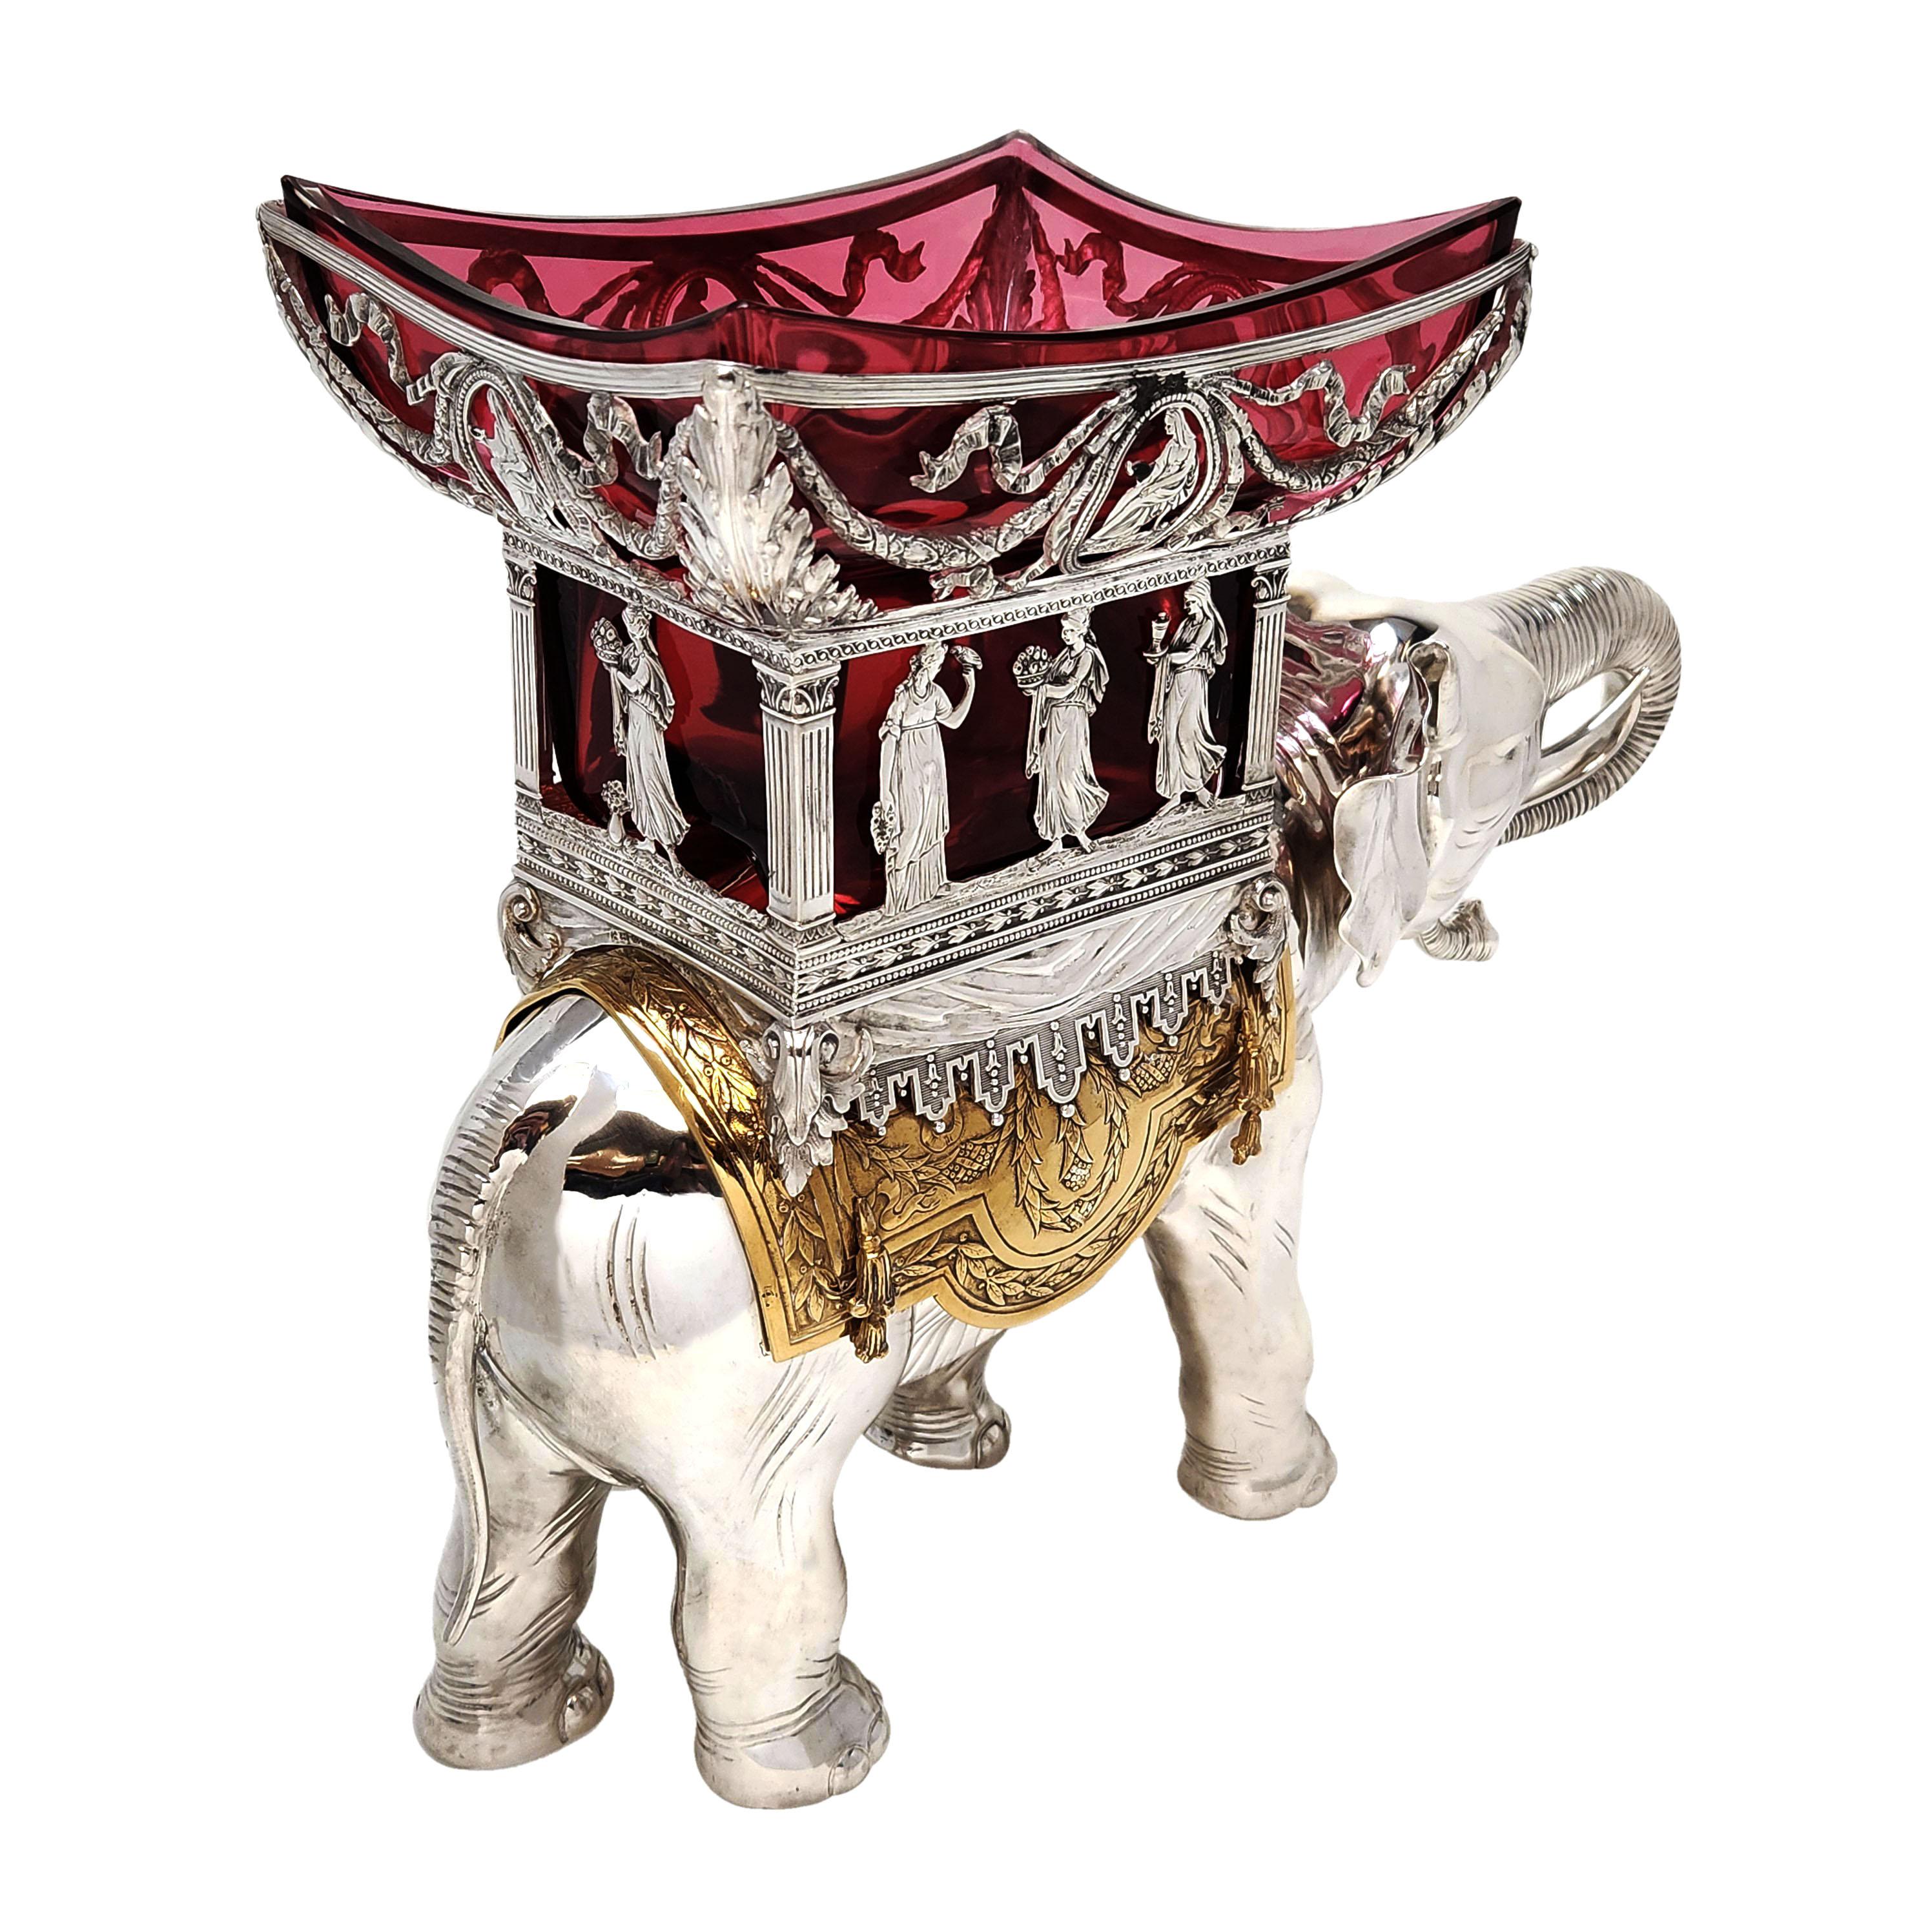 19th Century Antique Large Solid Silver, Gilt & Glass Elephant Centrepiece Bowl, circa 1890 For Sale